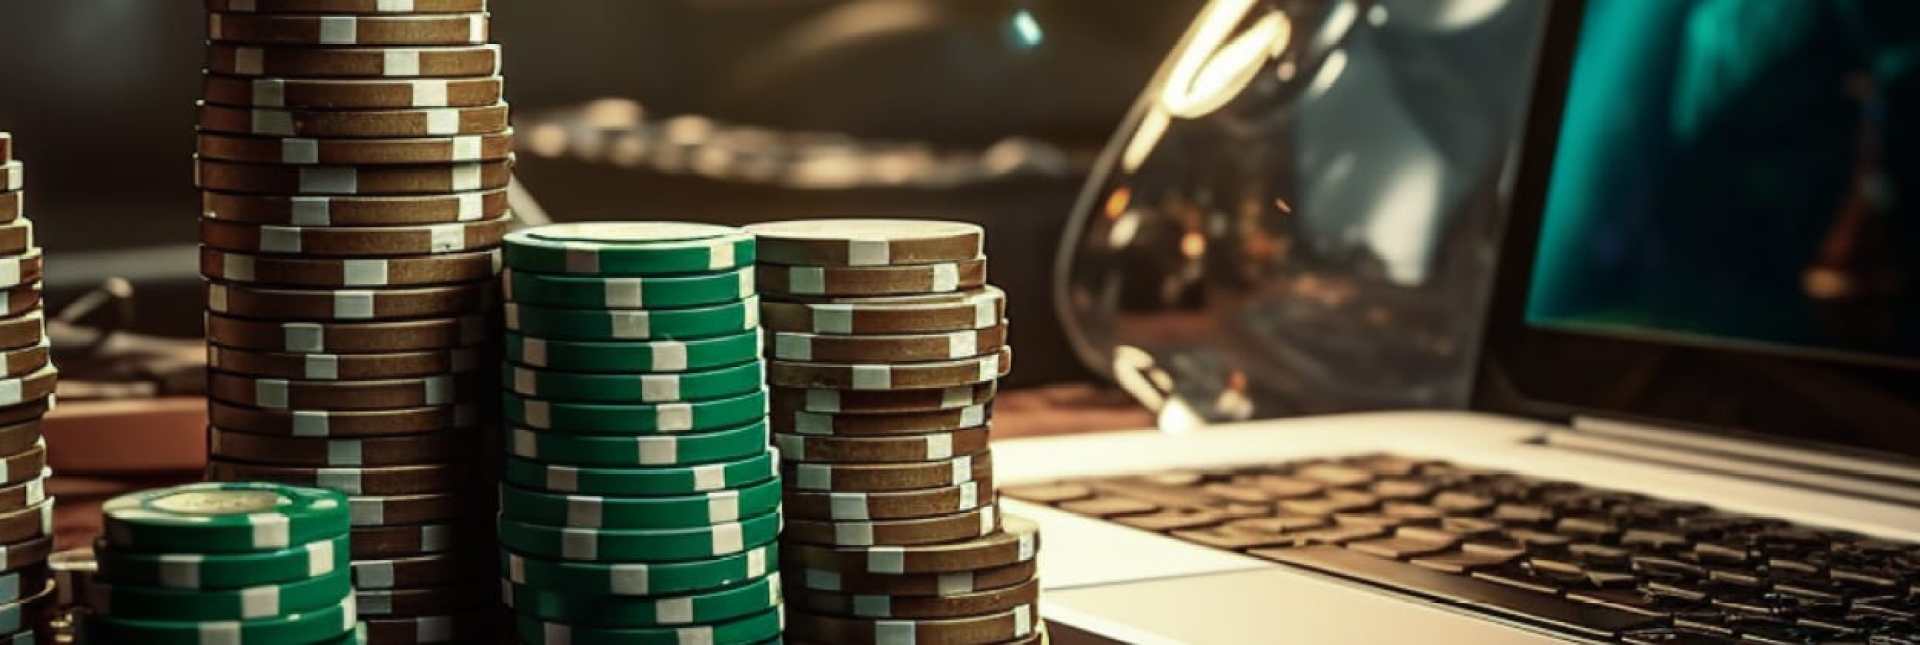 Frequently asked questions about real money online casinos